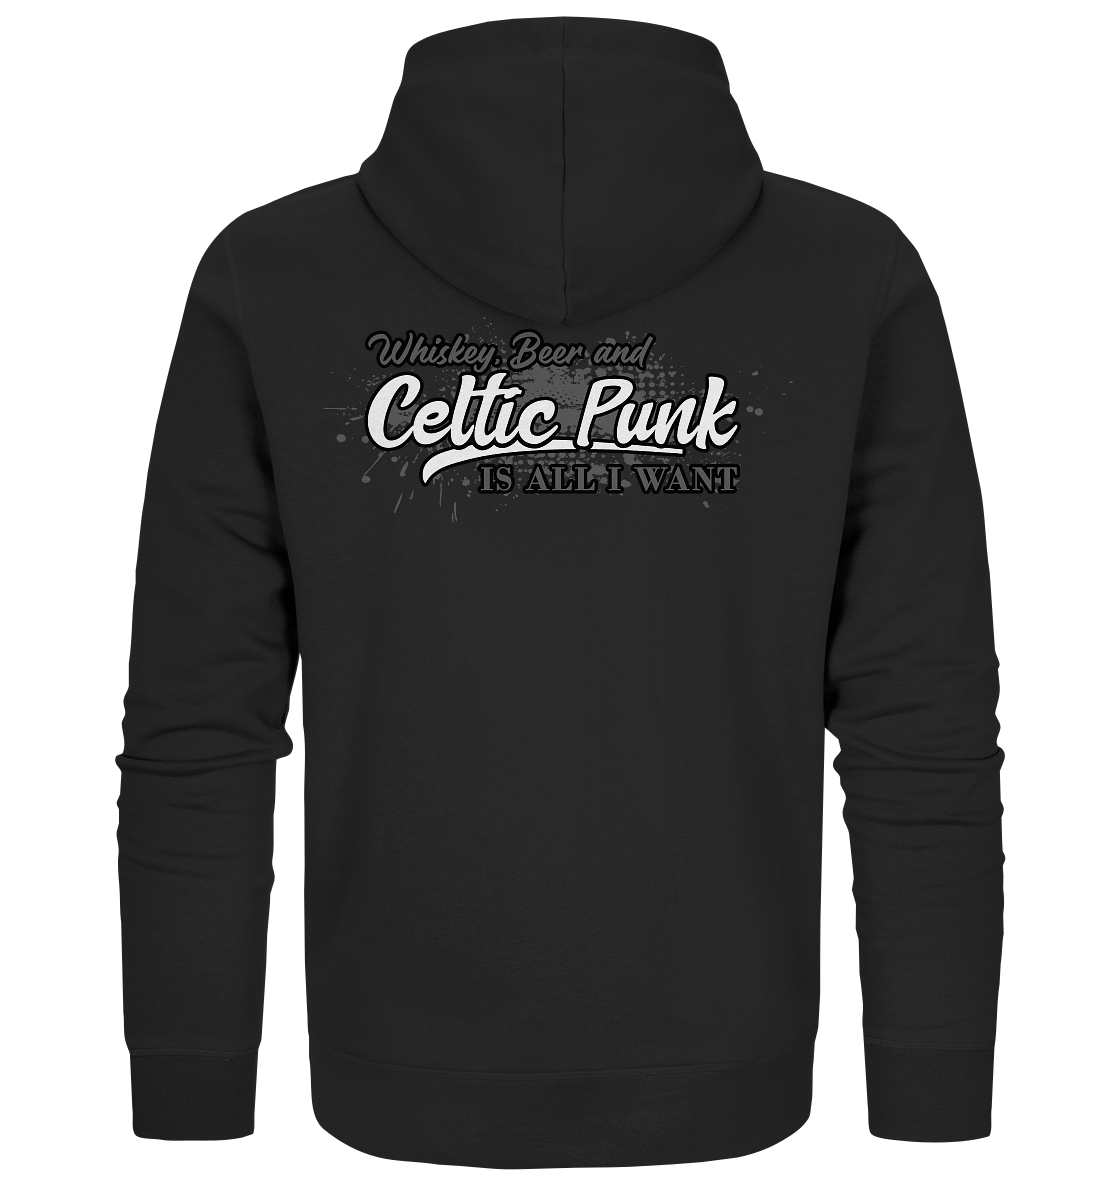 Whiskey, Beer And Celtic Punk "Is All I Want" - Organic Zipper